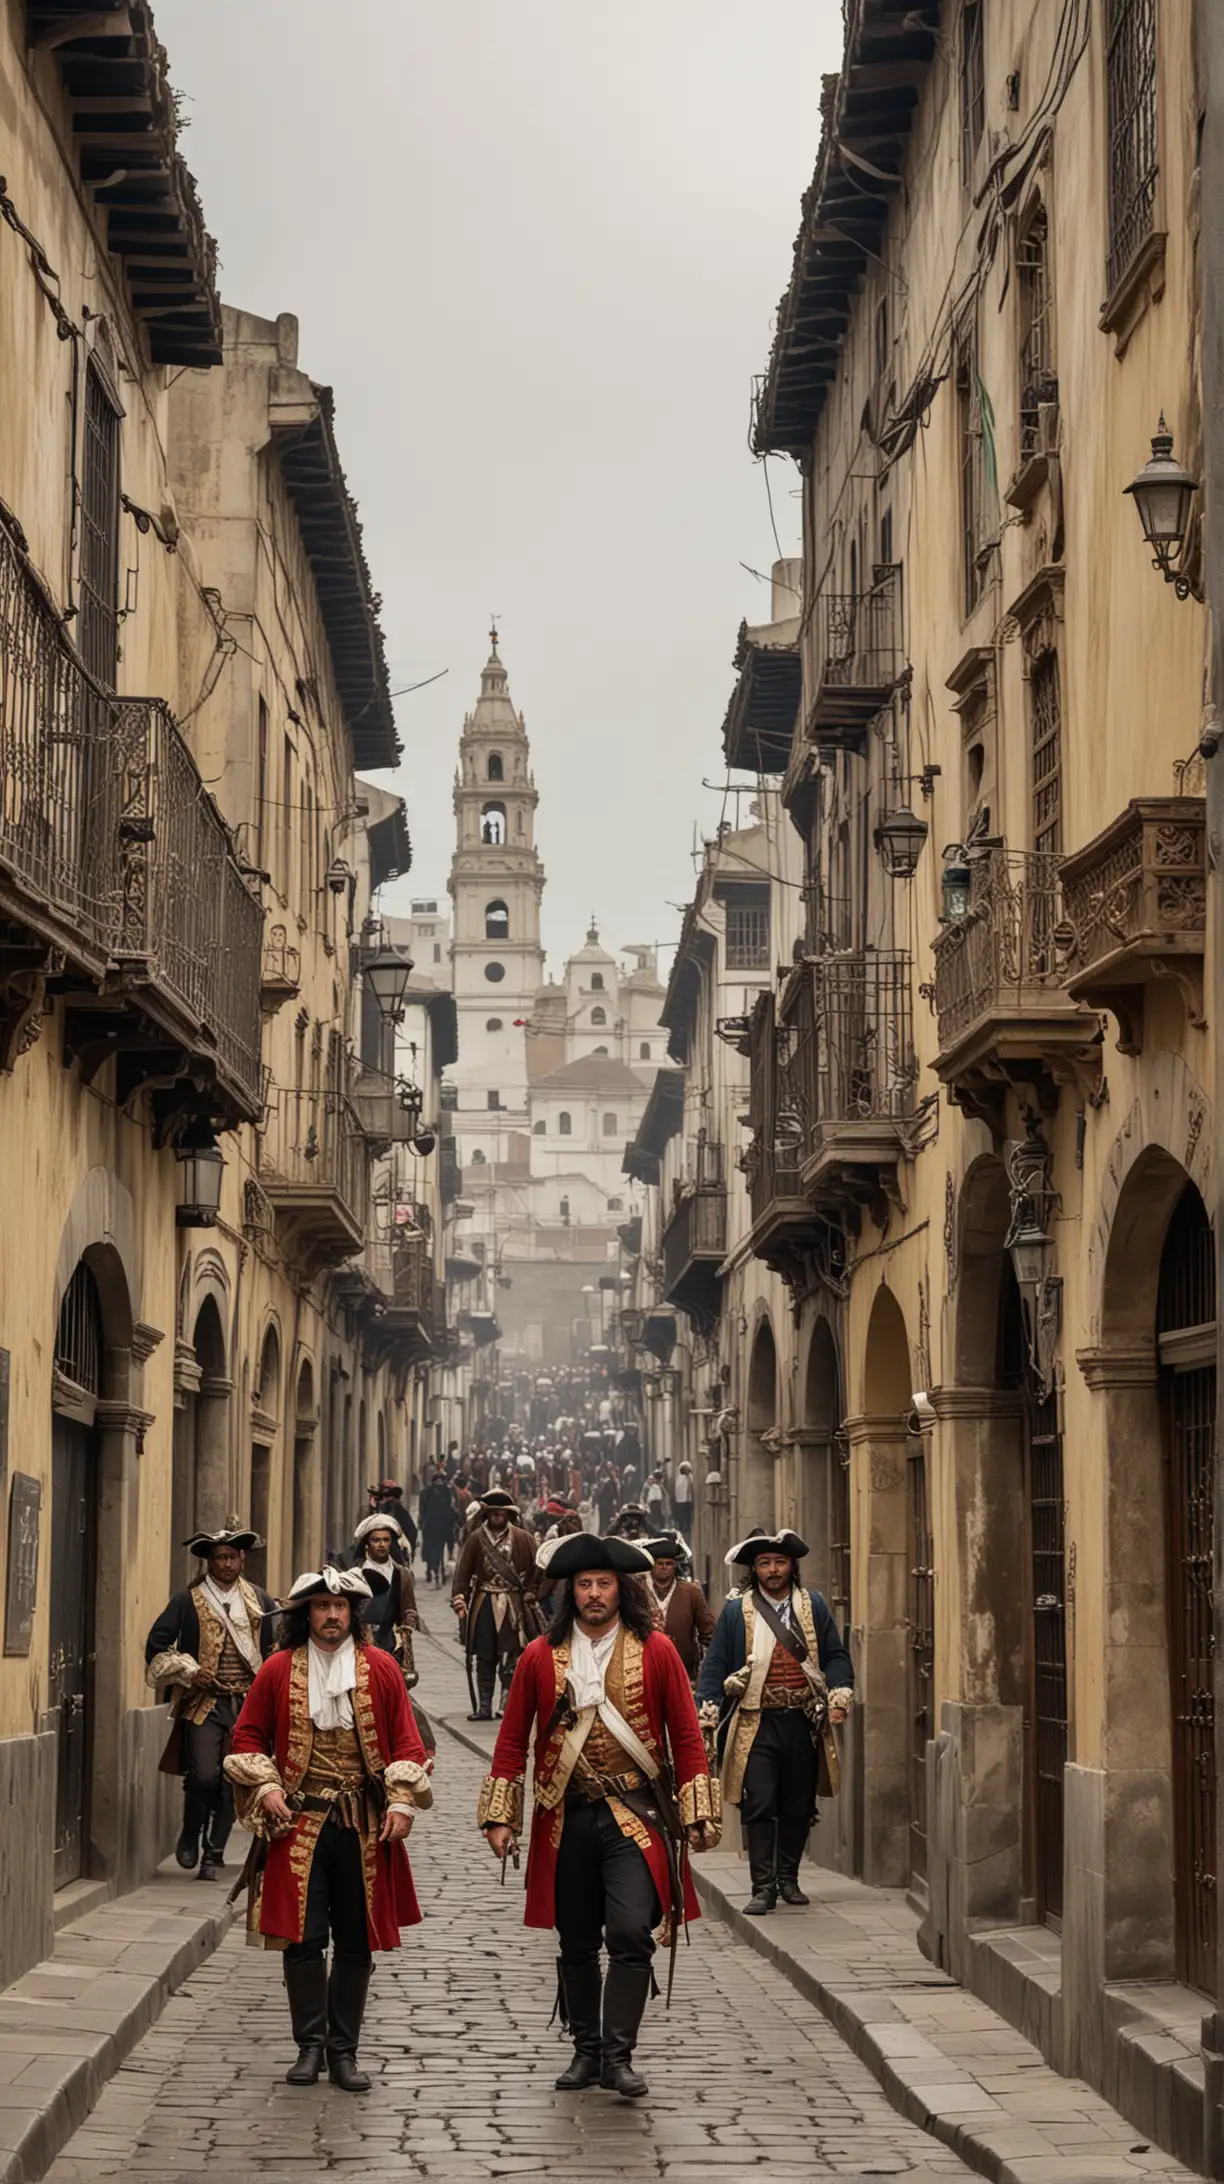 Scene: In 1680, the opulent city of Lima, Peru, fell victim to a daring pirate raid led by the notorious Captain Henry Morgan. 